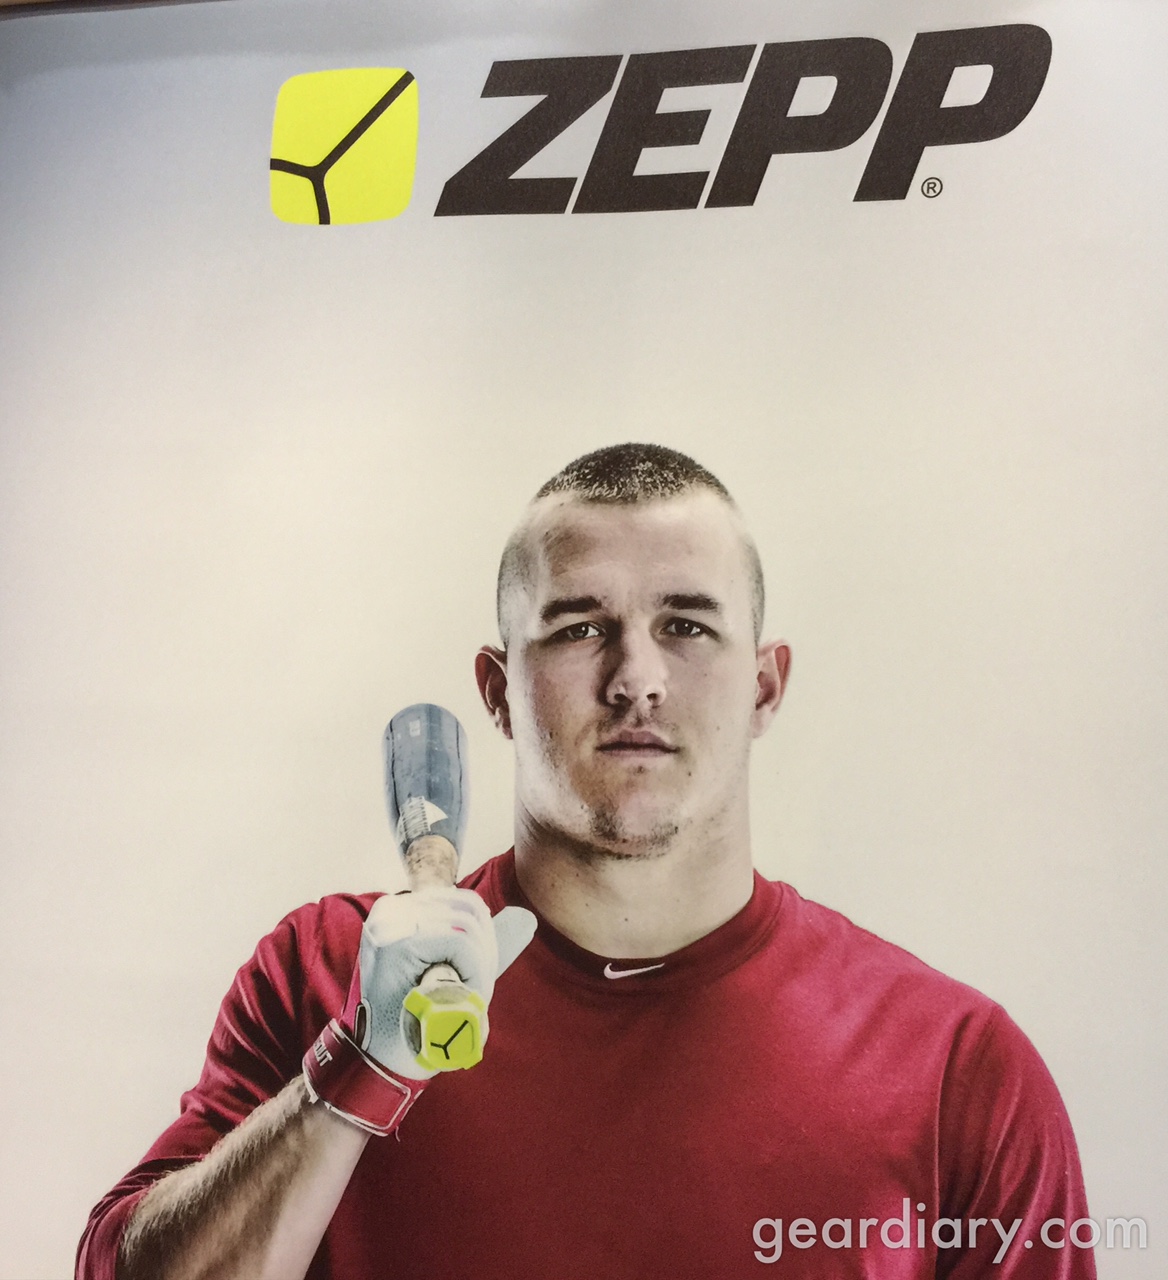 Zepp Has the Tools to Make You a Better Swinger